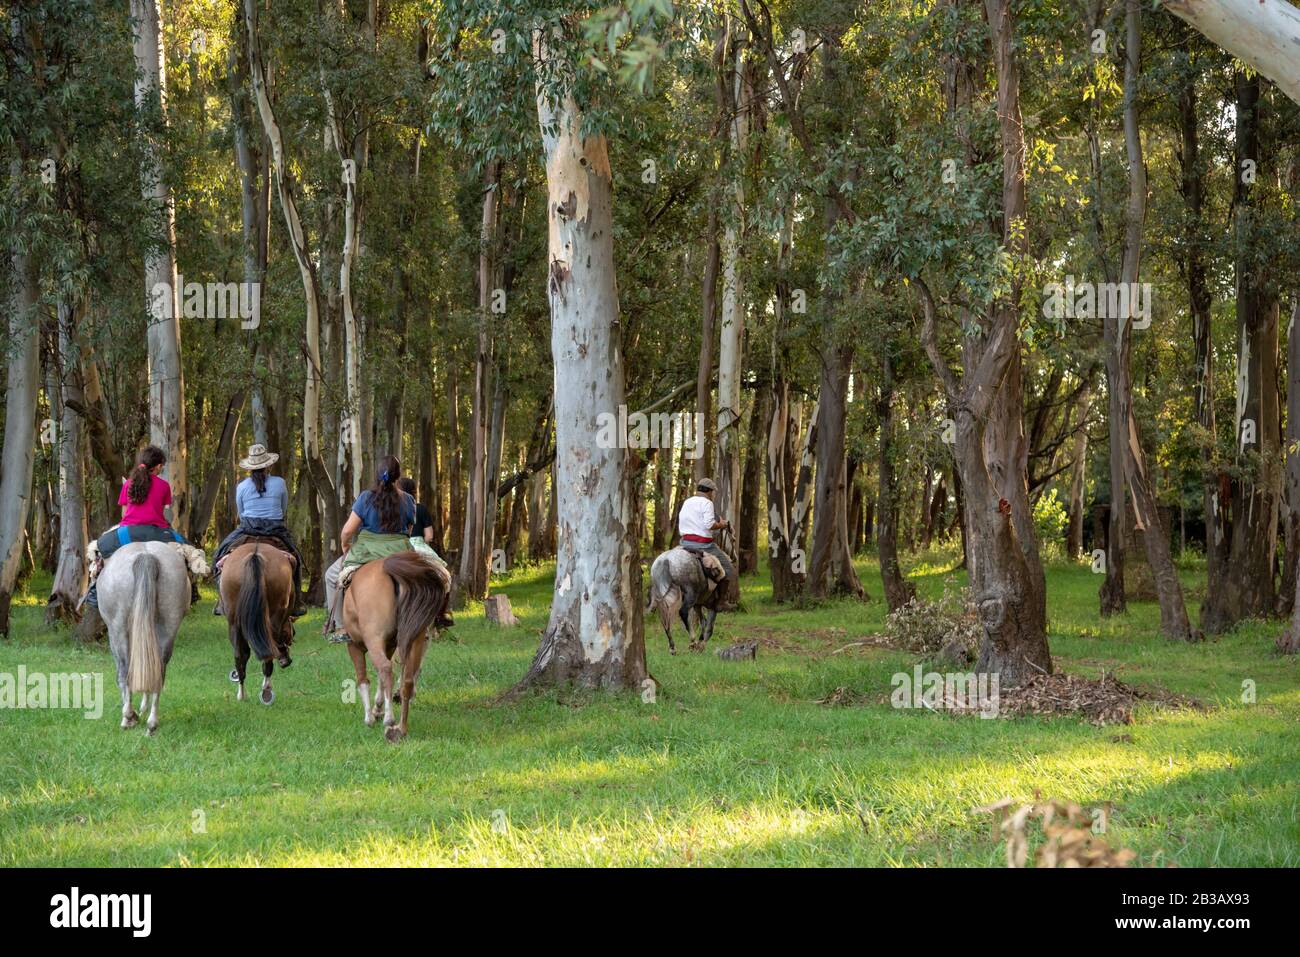 Family riding a horse among the trees of a small forest Stock Photo